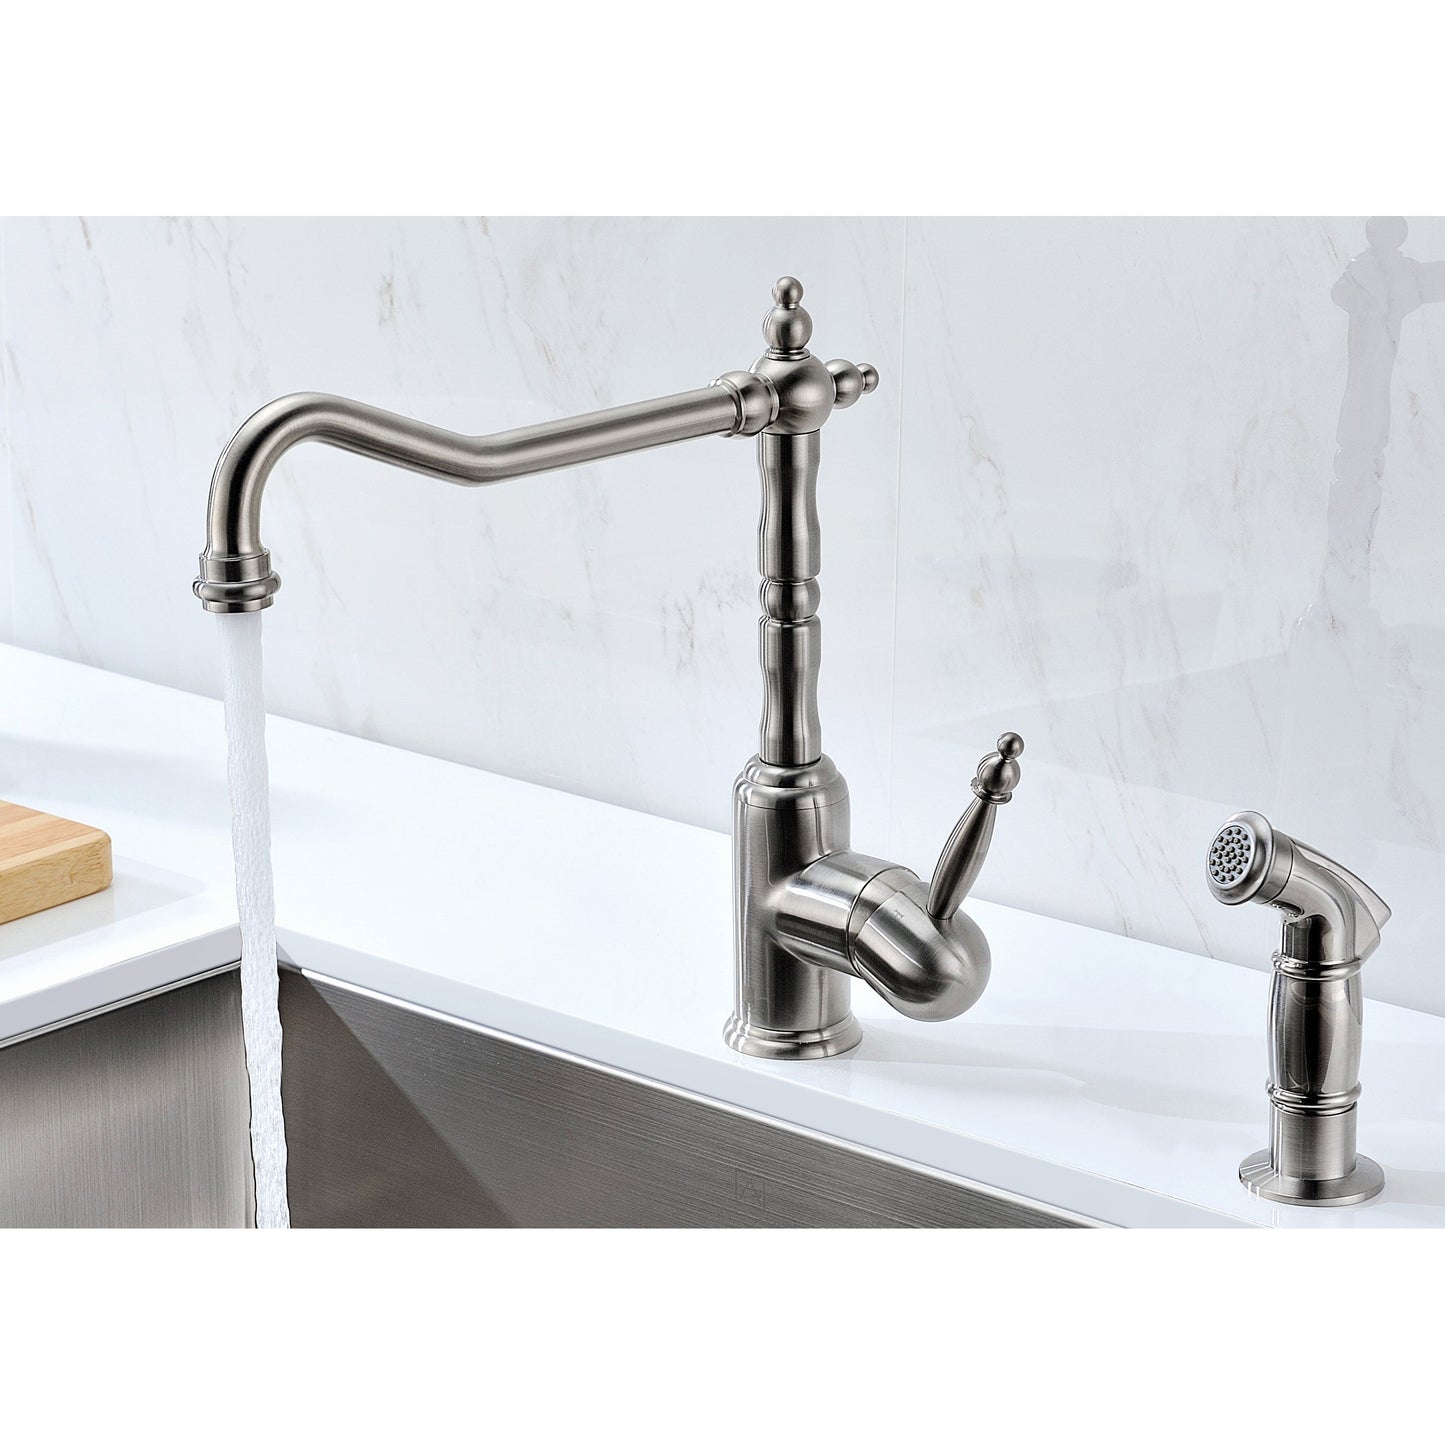 ANZZI Elysian Series 36" Double Basin 60/40 Stainless Steel Farmhouse Kitchen Sink With Strainer and Brushed Nickel Locke Faucet